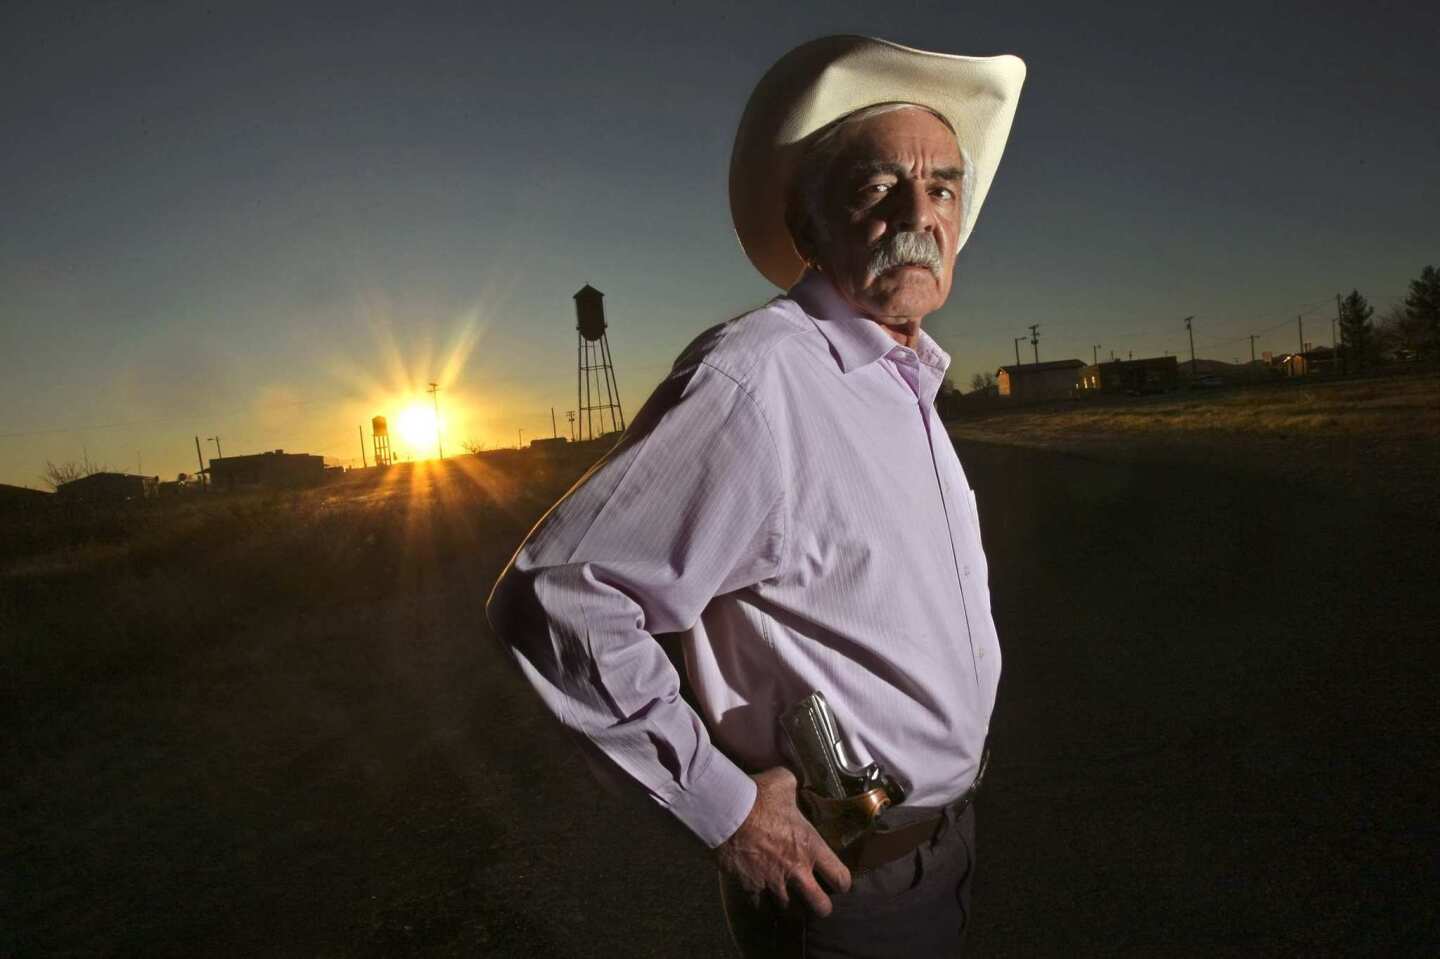 Javier Lozano is the pistol-packing municipal judge in Columbus, N.M., where the mayor, police chief and a city trustee pleaded guilty in a scheme to smuggle guns across the nearby U.S.-Mexico border. If Mexican cartel violence isn't stopped, he said, more U.S. communities are likely to experience similar disgraces